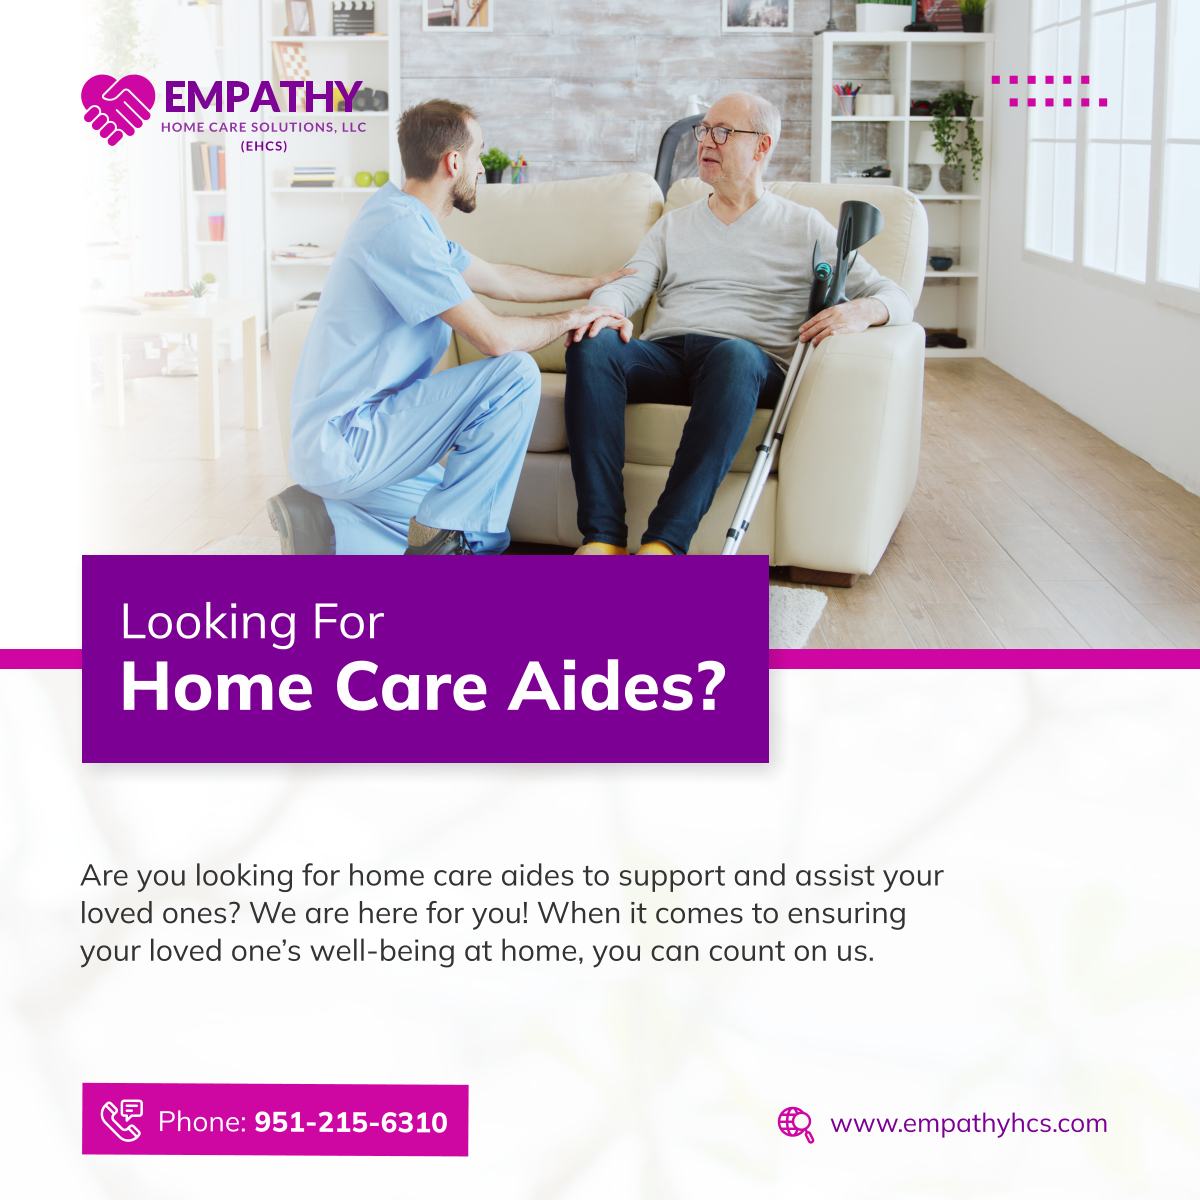 Do your loved ones have trouble living by themselves alone at home due to physical challenges or old age? Allow us to take care of them! How? Let’s start arranging your loved one’s care today! Call us. 

#CoronaCalifornia #HomeCareAide #HomeCare